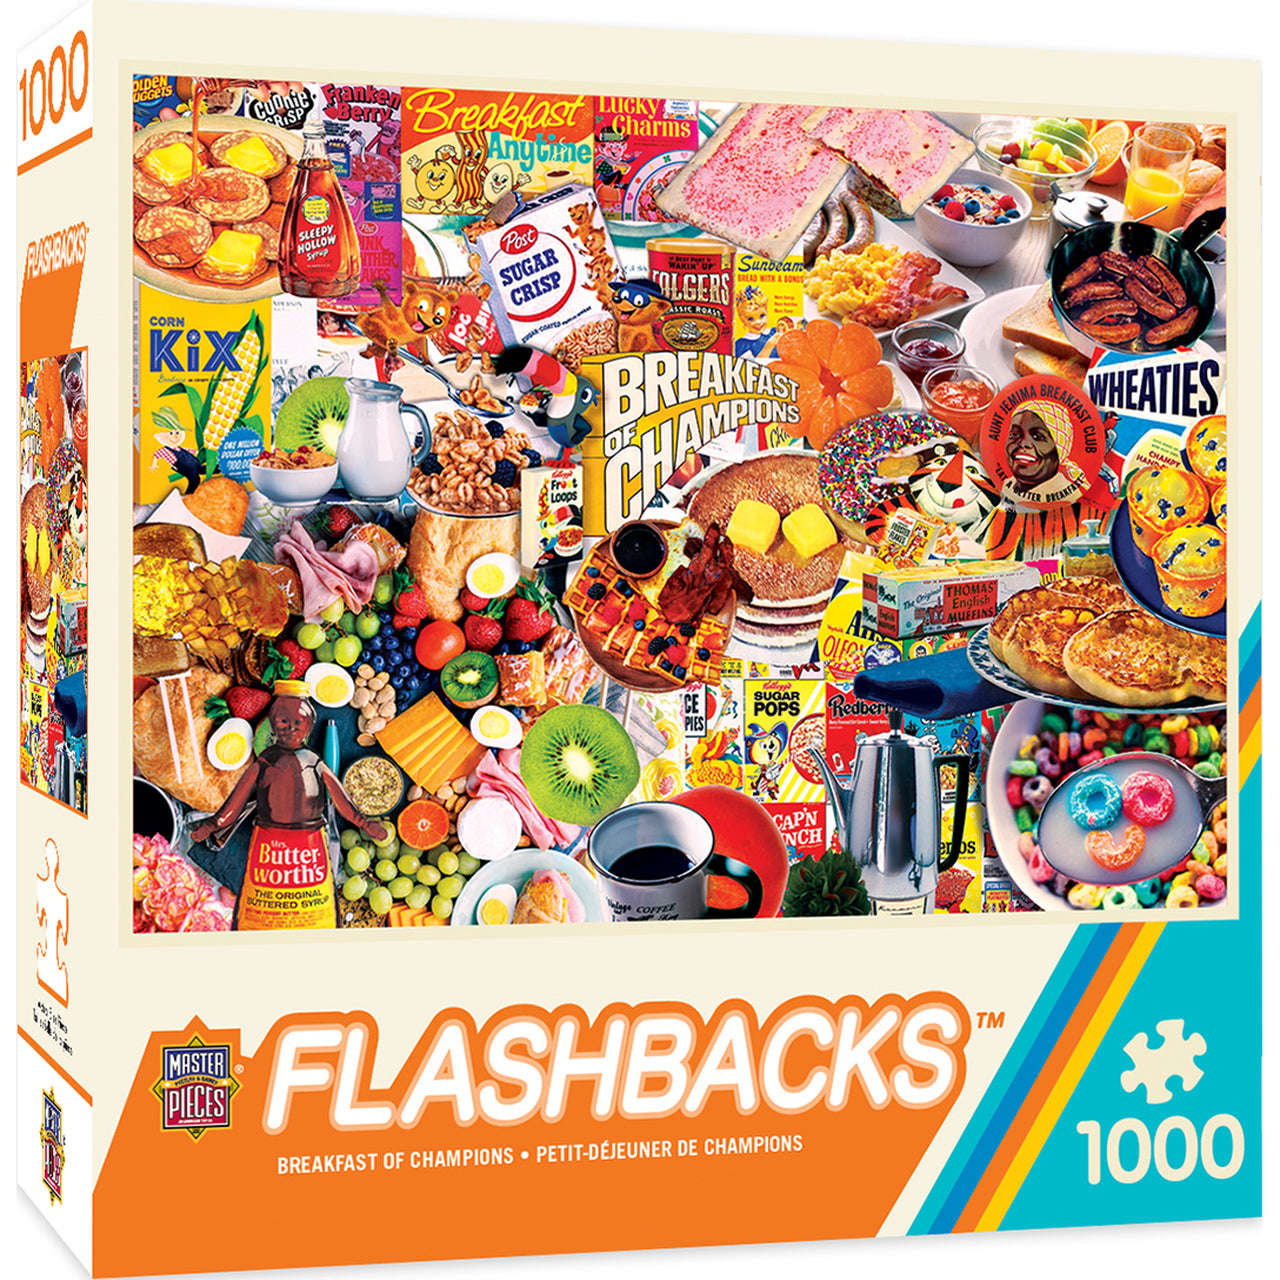 Flashbacks Breakfast of Champions 1000 Piece Jigsaw Puzzle by Masterpieces